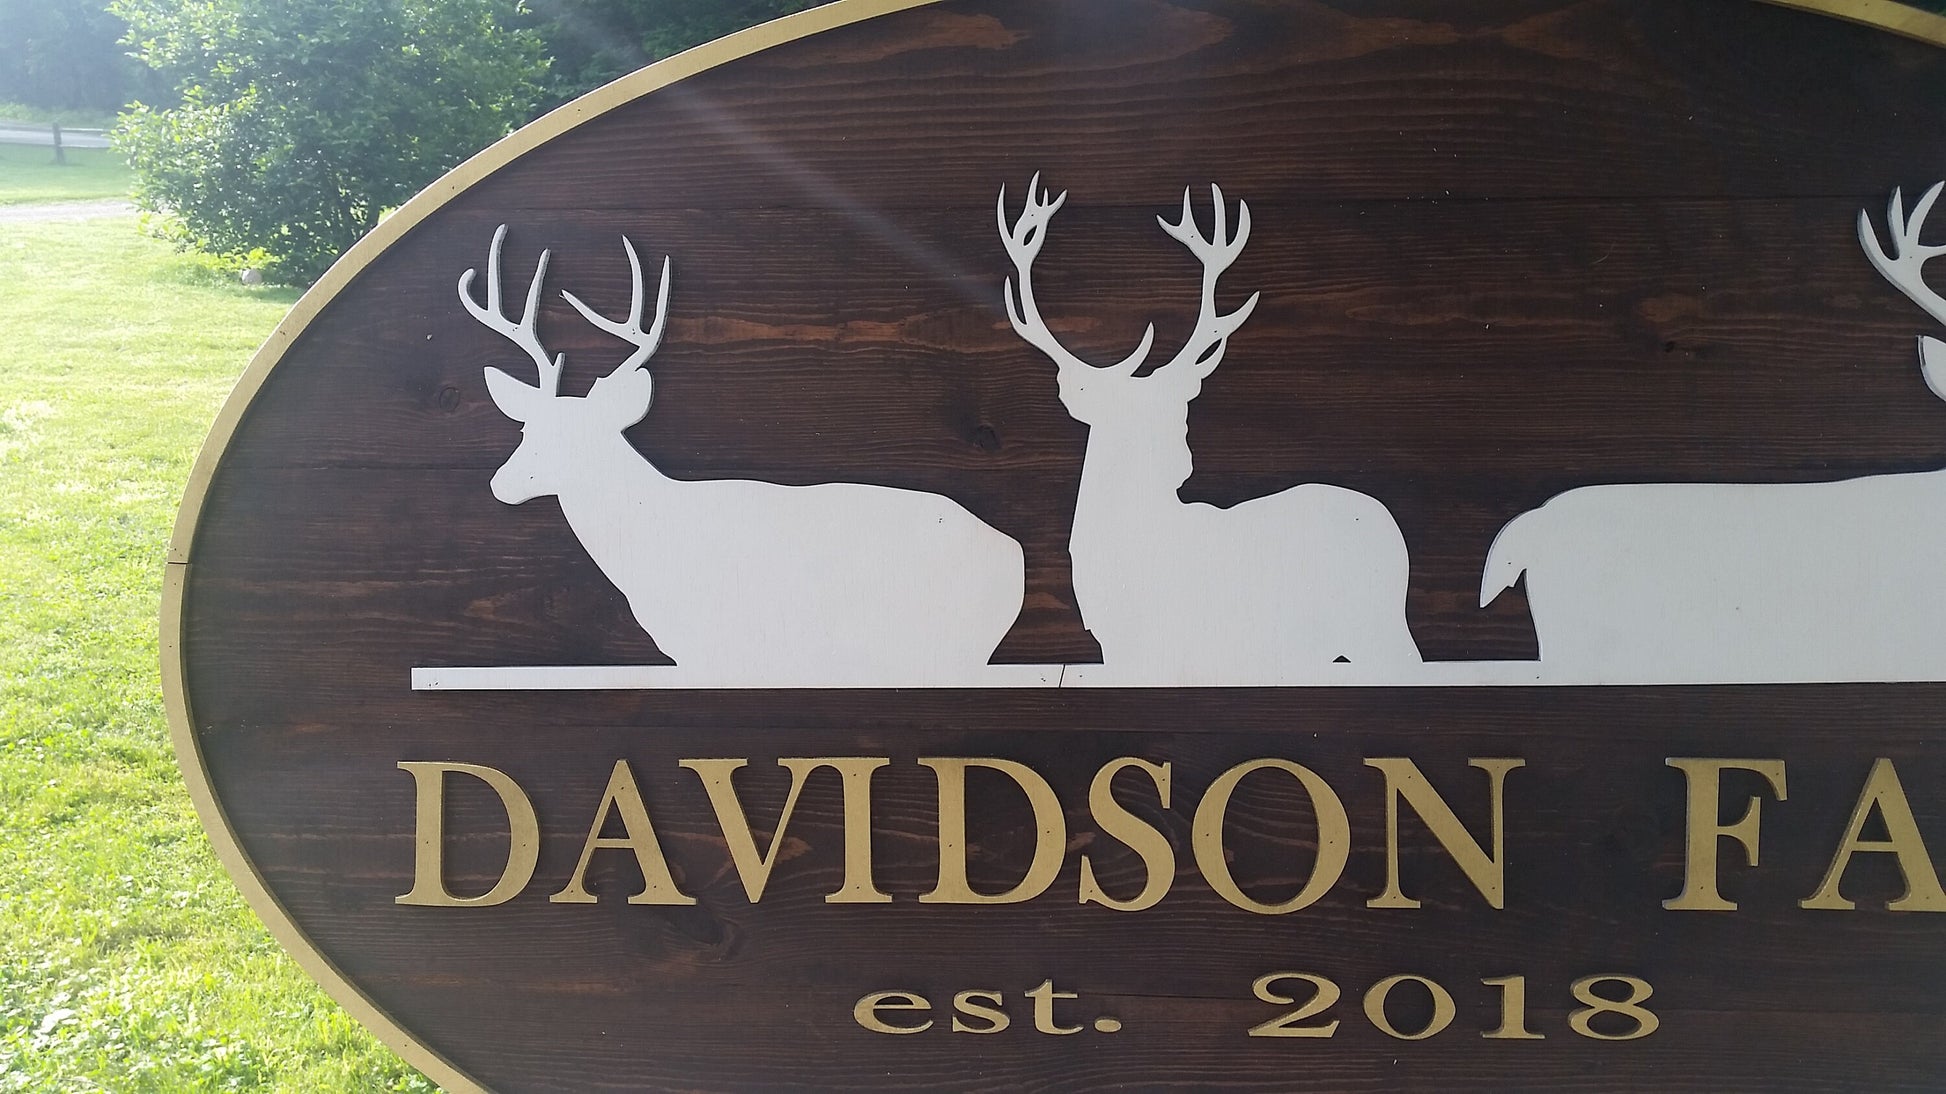 custom farm sign wood ranch signage great for hanging large or small indoor or outdoor with deer or stags